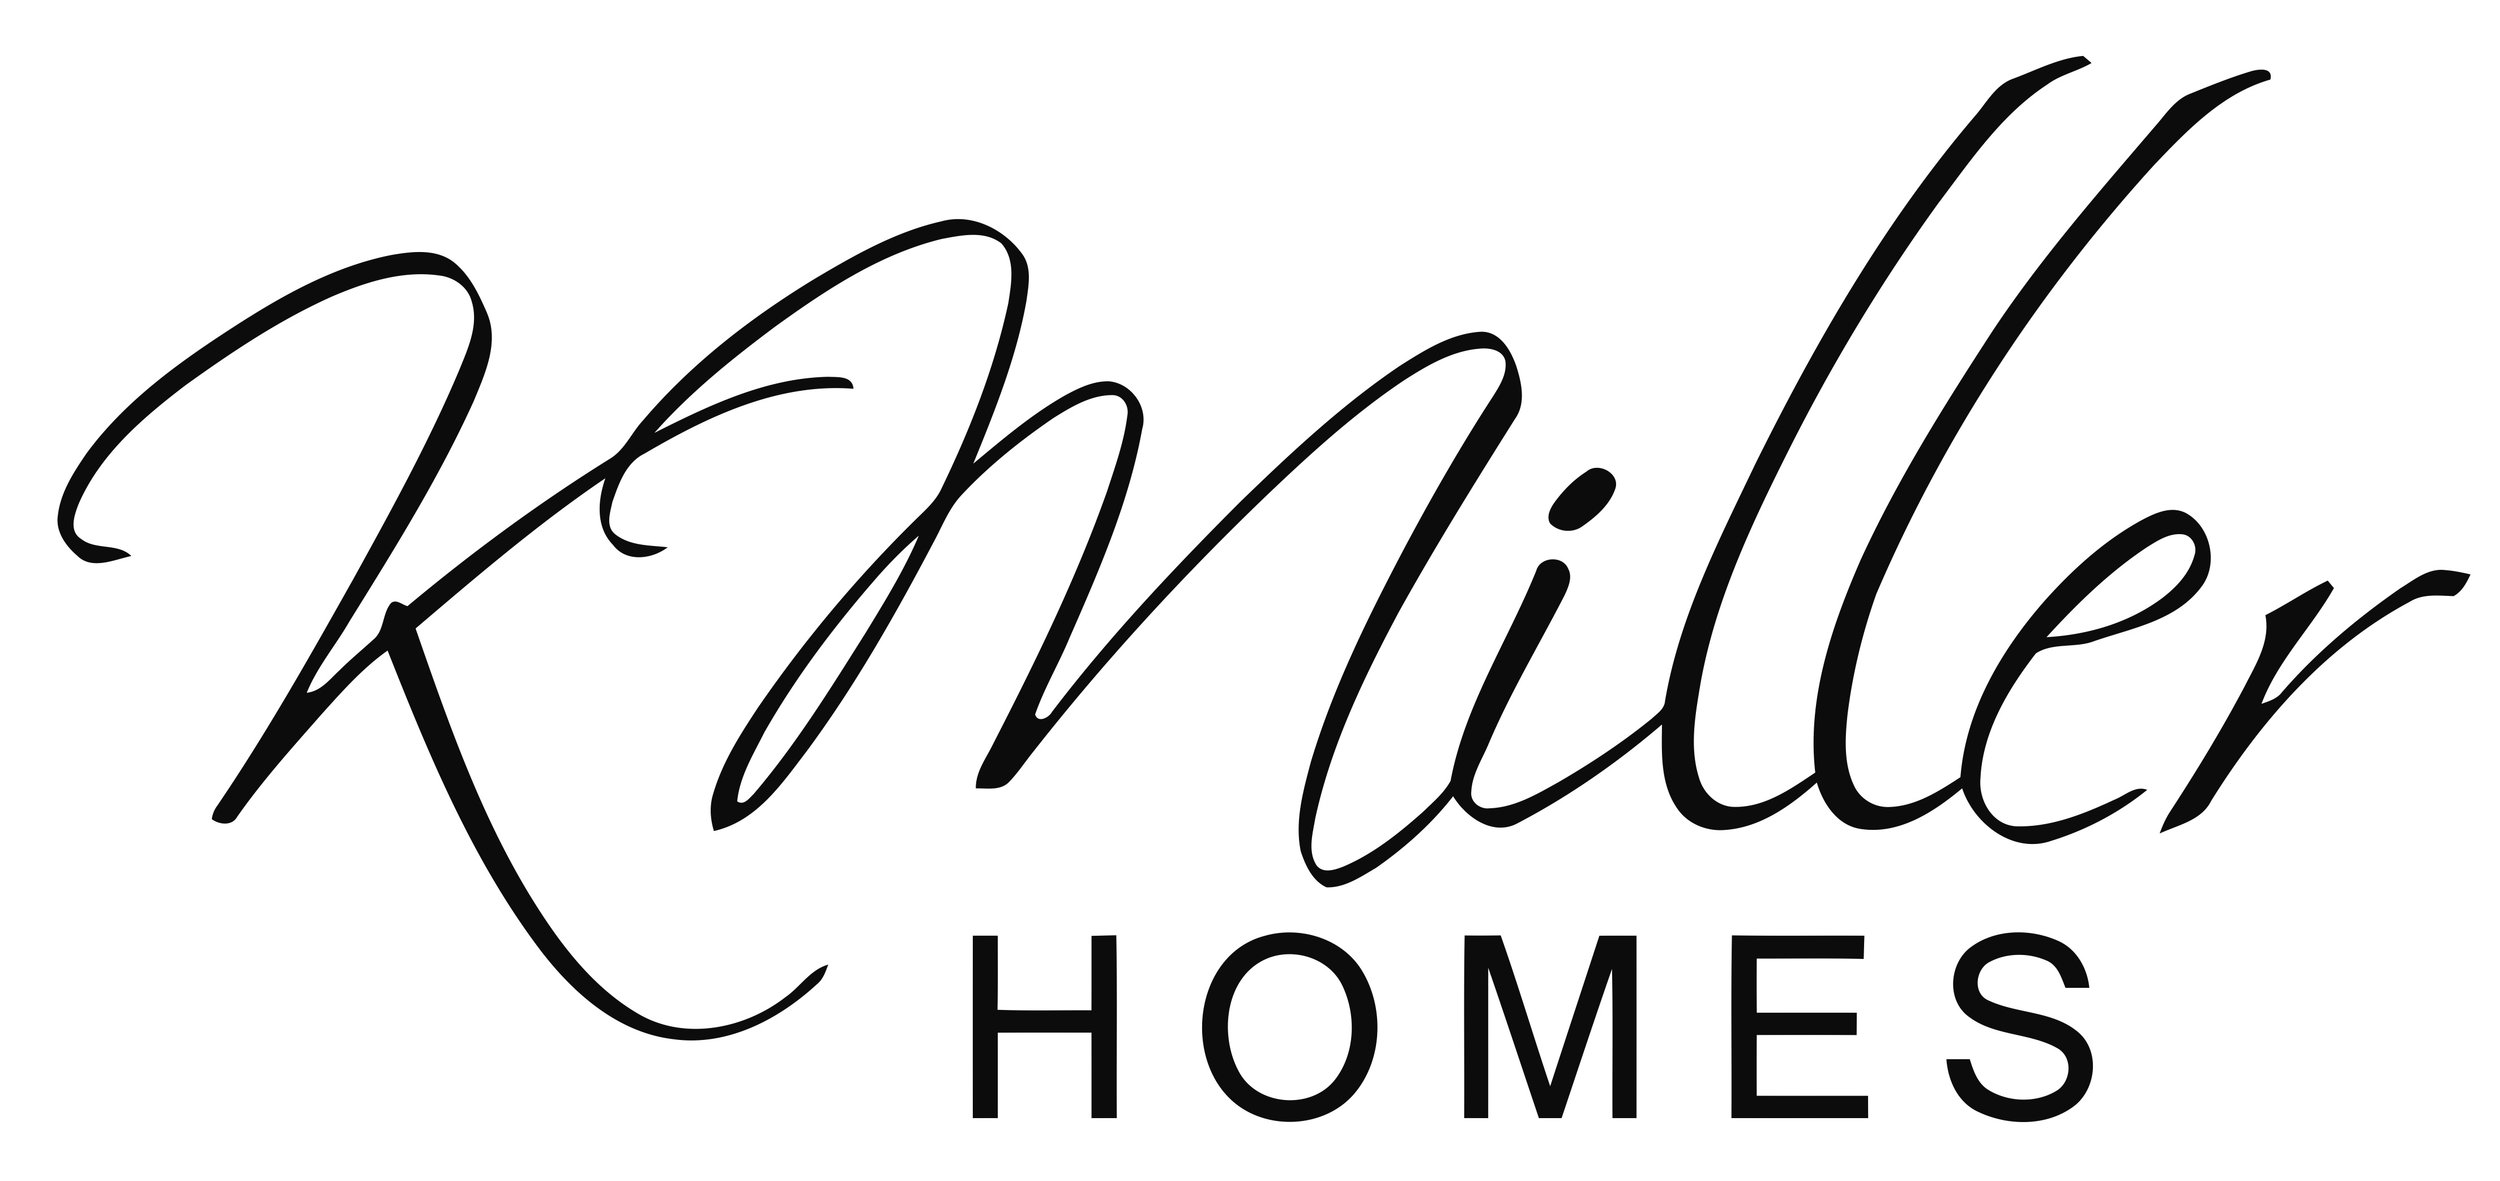  K Miller Homes uses Robert Miller Photography for their real estate photography in Northern Virginia 